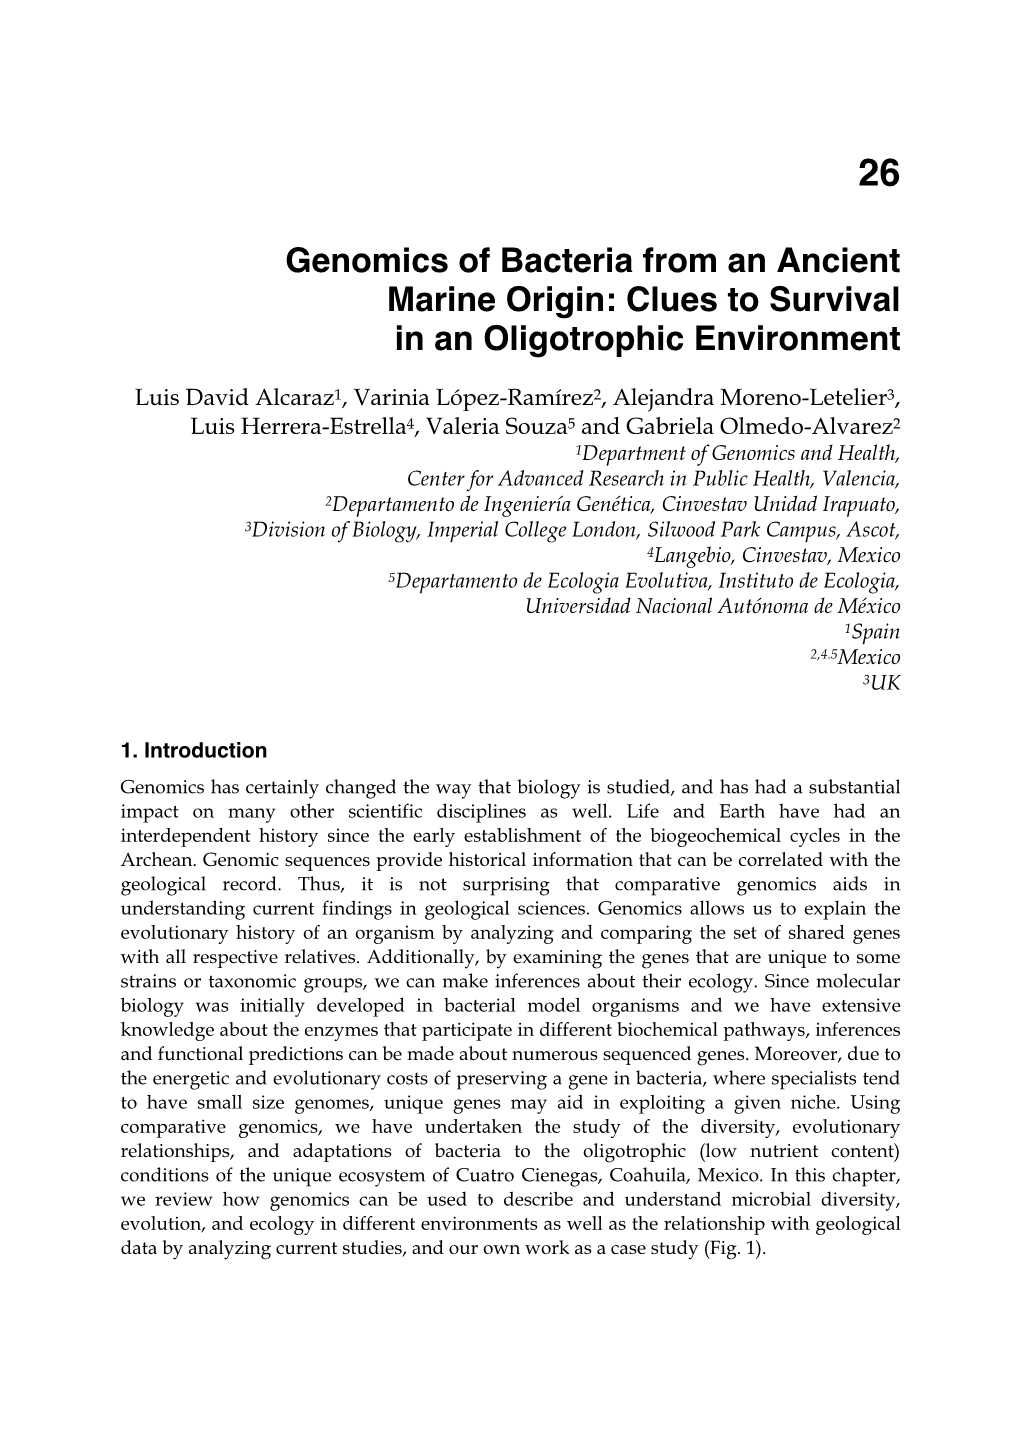 Genomics of Bacteria from an Ancient Marine Origin: Clues to Survival in an Oligotrophic Environment